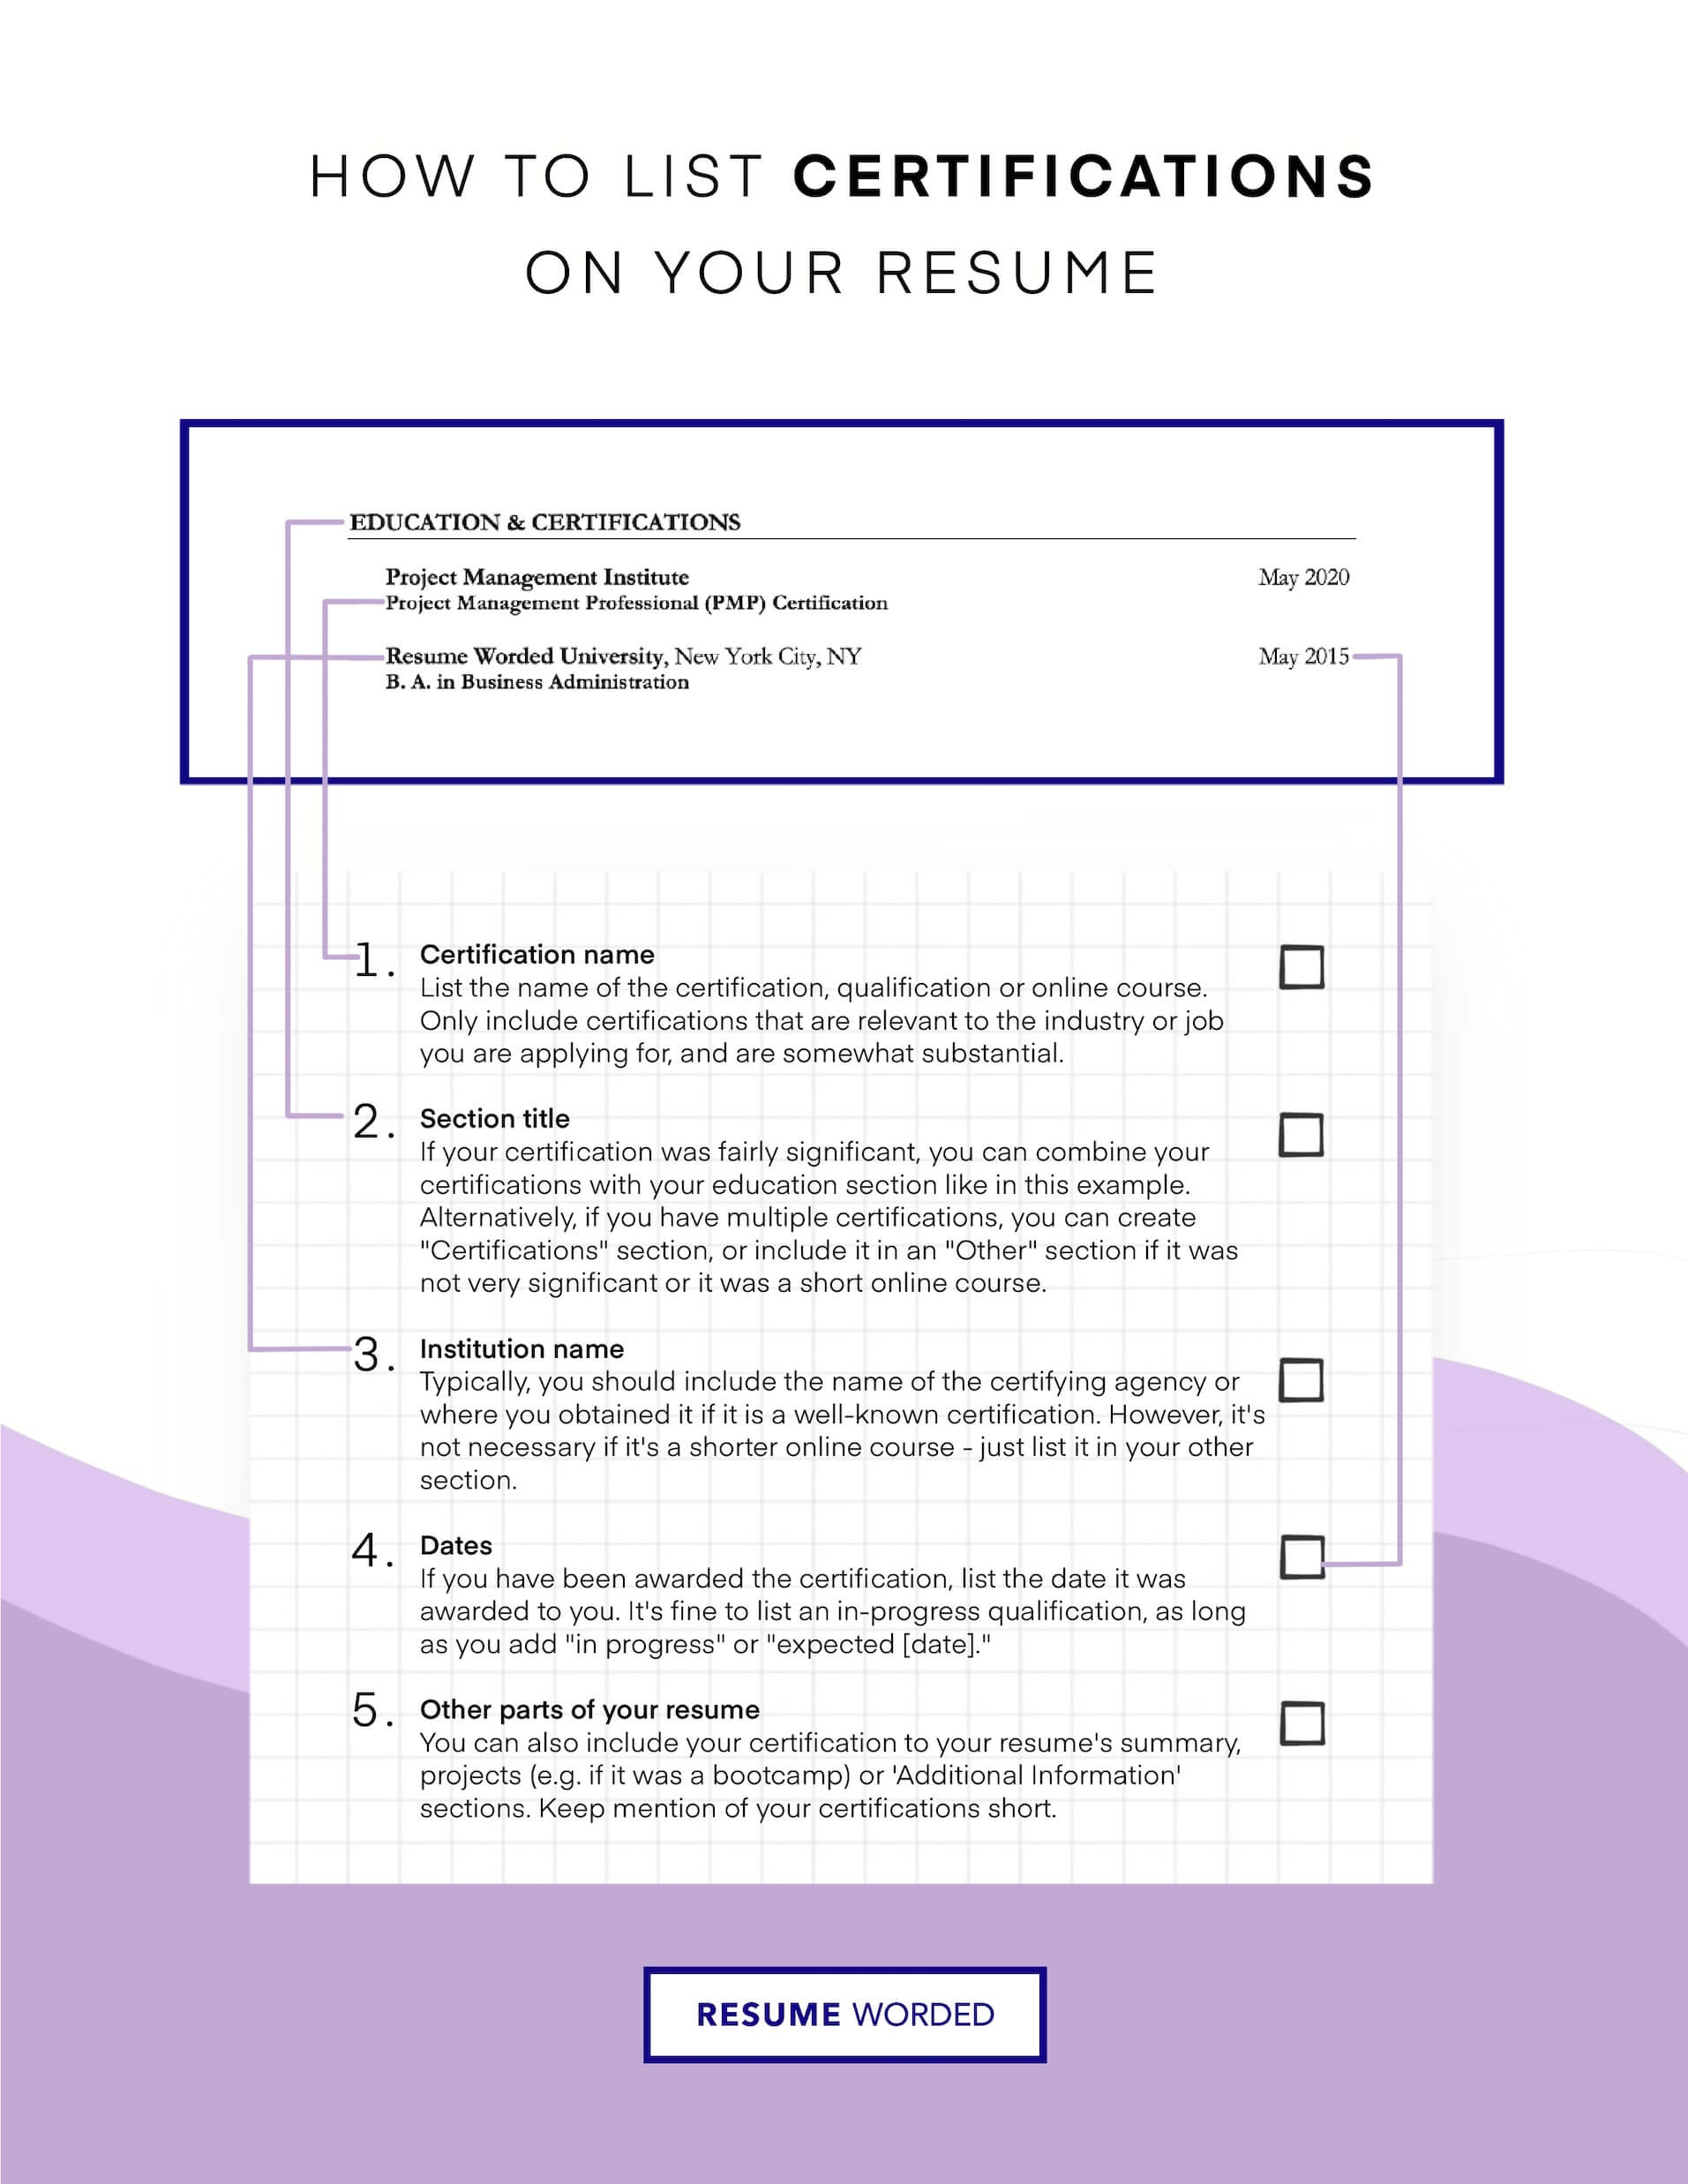 Ensure you have the right healthcare certification for each job. - Care Coordinator Resume